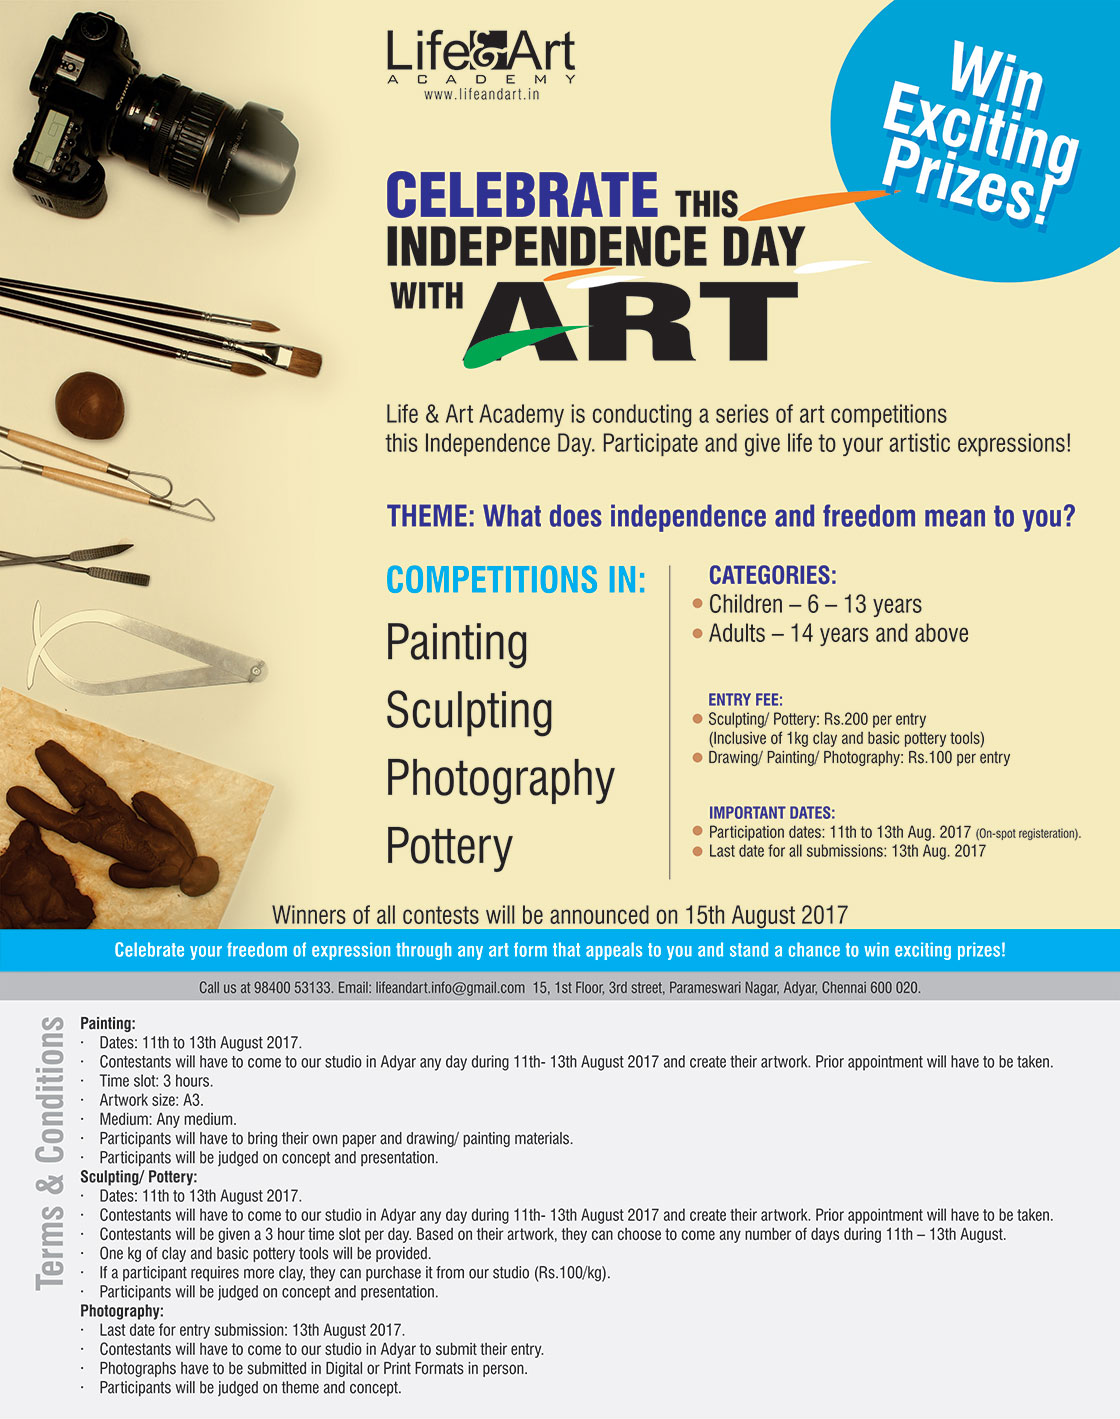 Independance Day Art Competition in Chennai August 2017